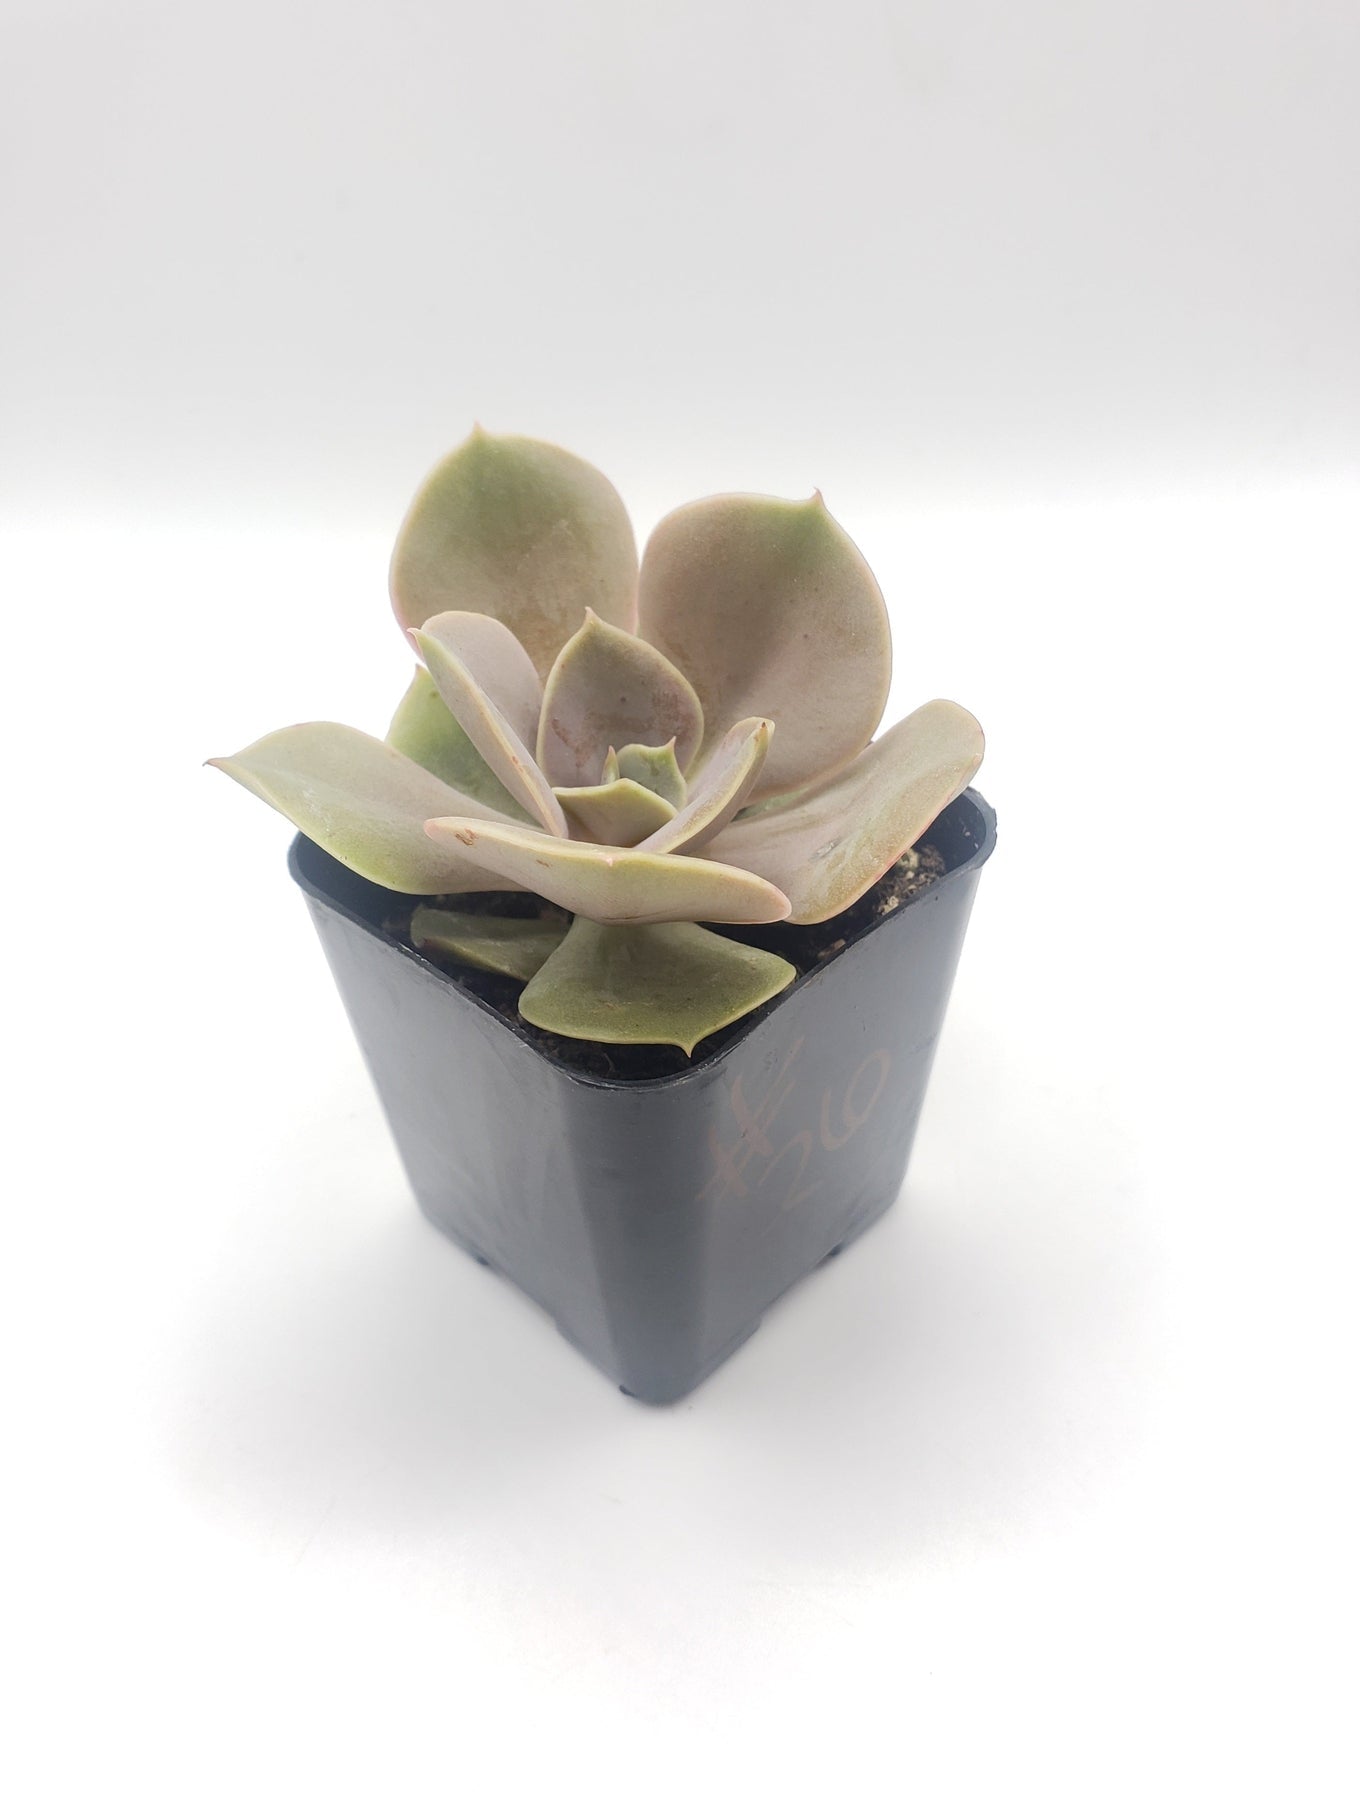 #26 Echeveria hybrid-Succulent - Small - Exact 2in Type-The Succulent Source